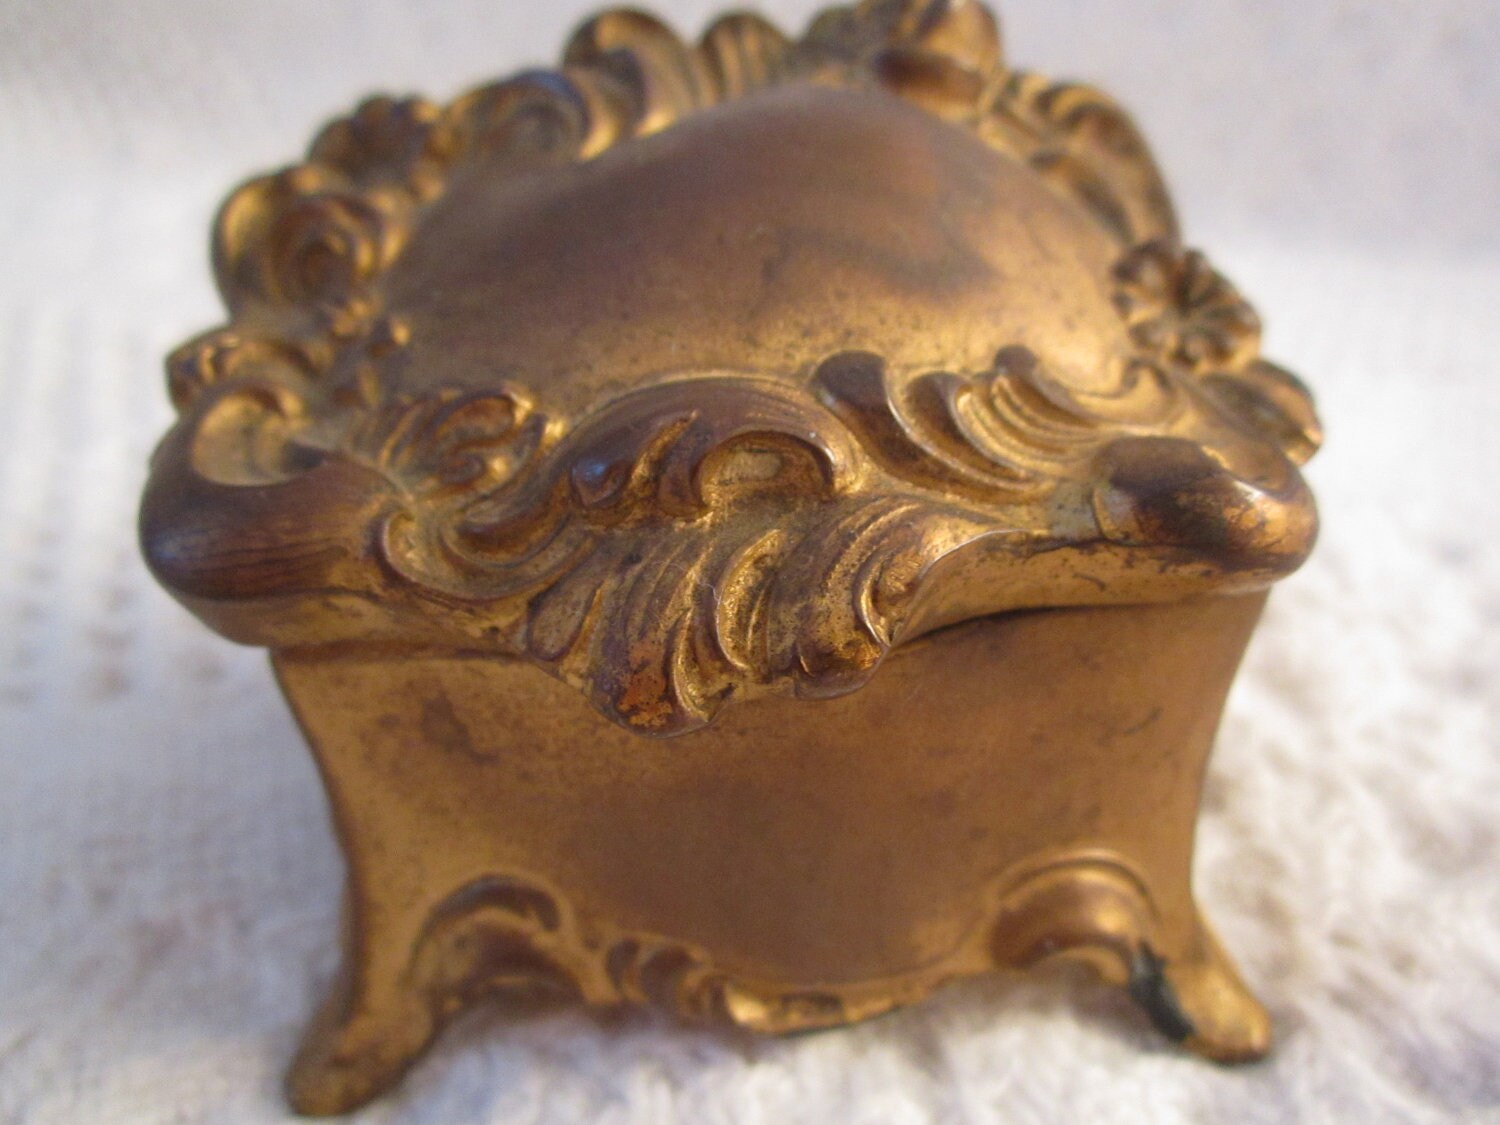 Antique Early 1900s Gold JEWELRY CASKET Box marked J.B. 928 